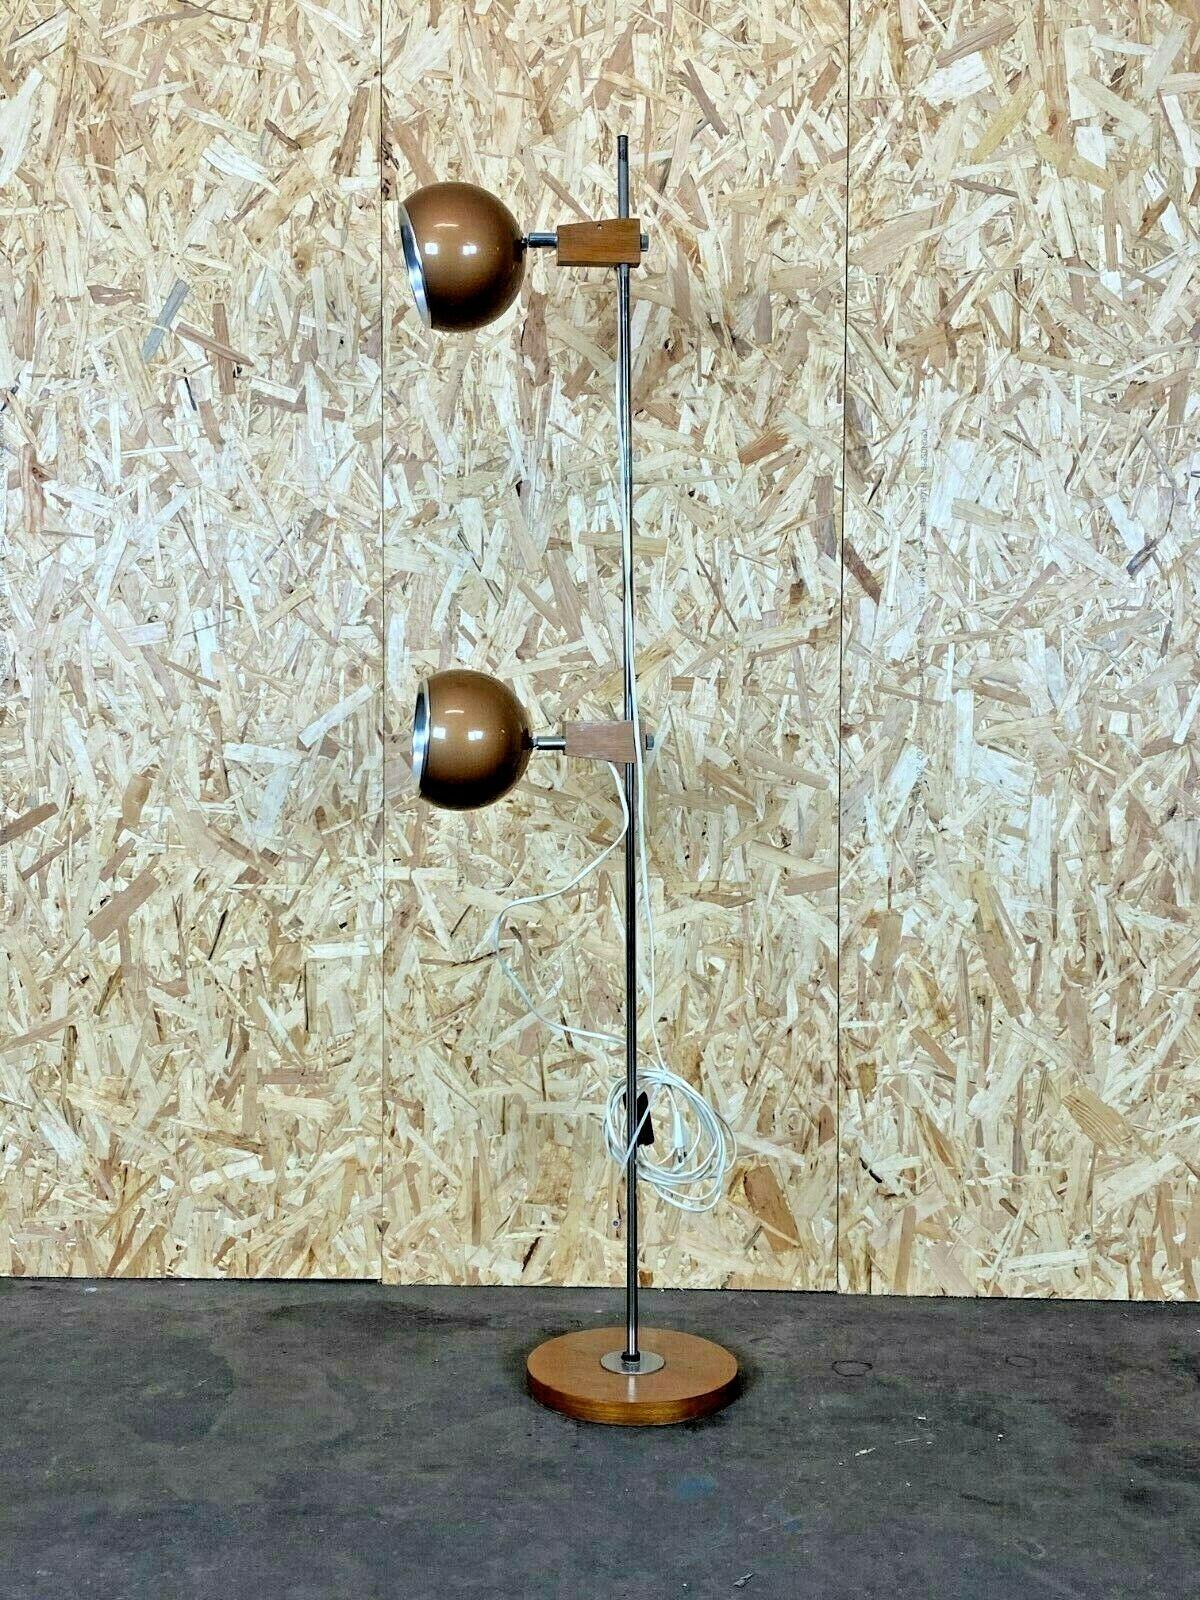 60s 70s lamp light floor lamp Temde Teak Space Age Design

Object: floor lamp

Manufacturer: Temde

Condition: good

Age: around 1960-1970

Dimensions:

Height = 146cm

Other notes:

The pictures serve as part of the